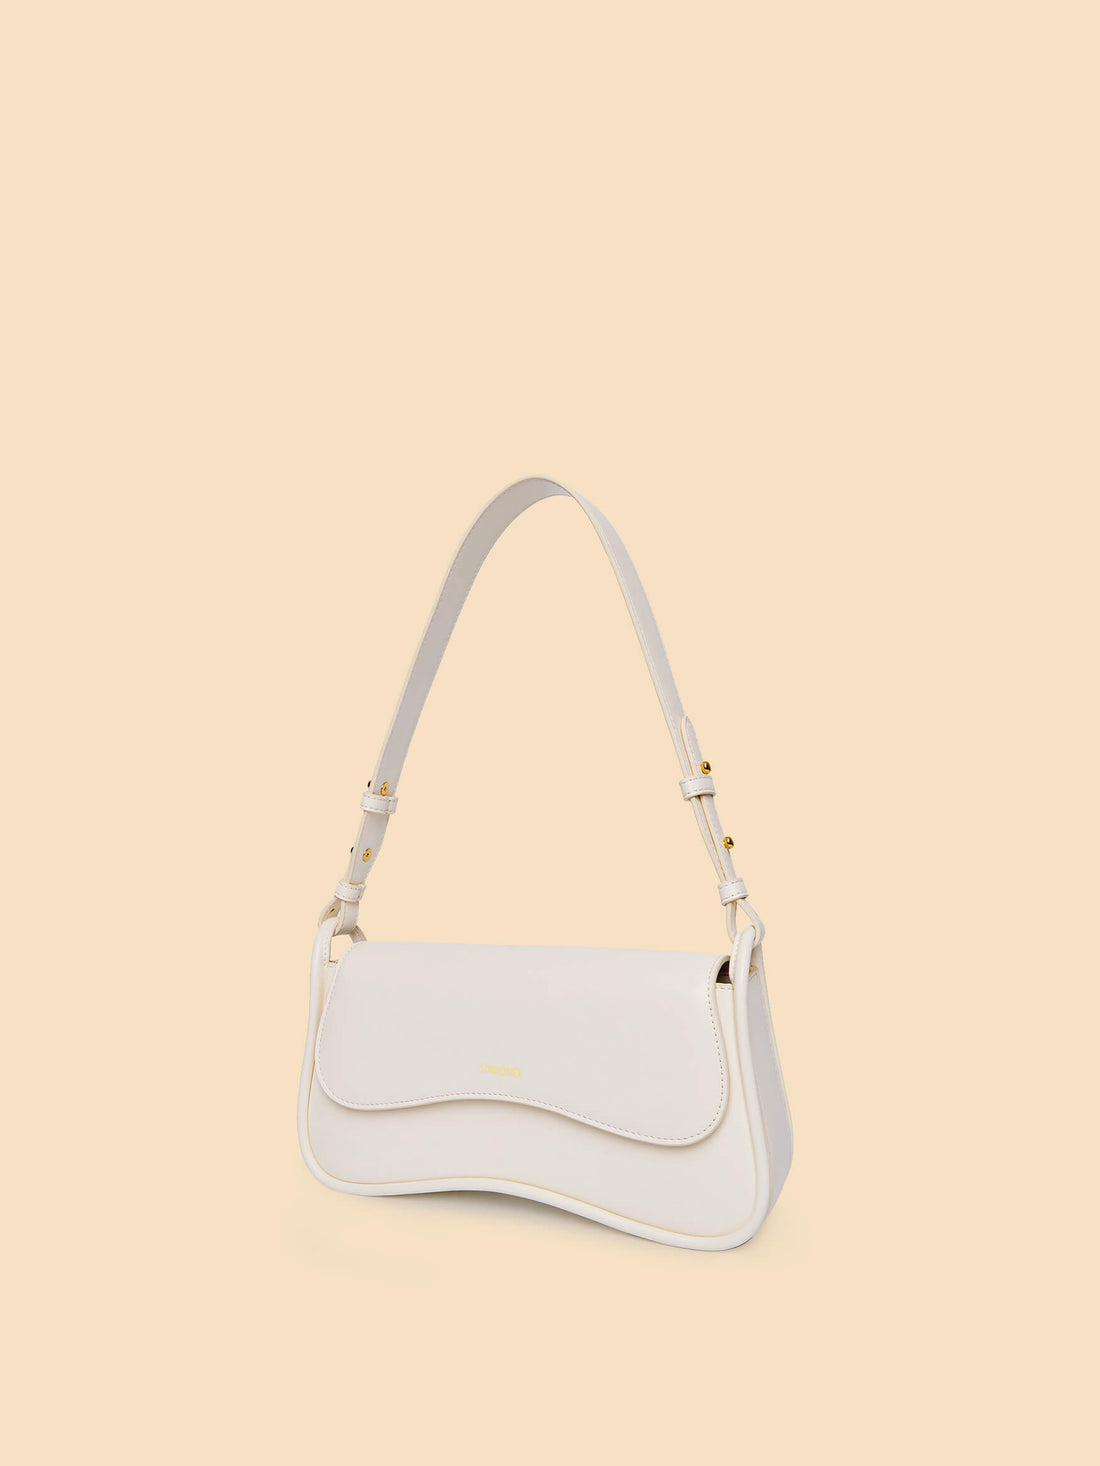 SINBONO Zoe Shoulder Bag White - Cruelty Free Leather Bag for women